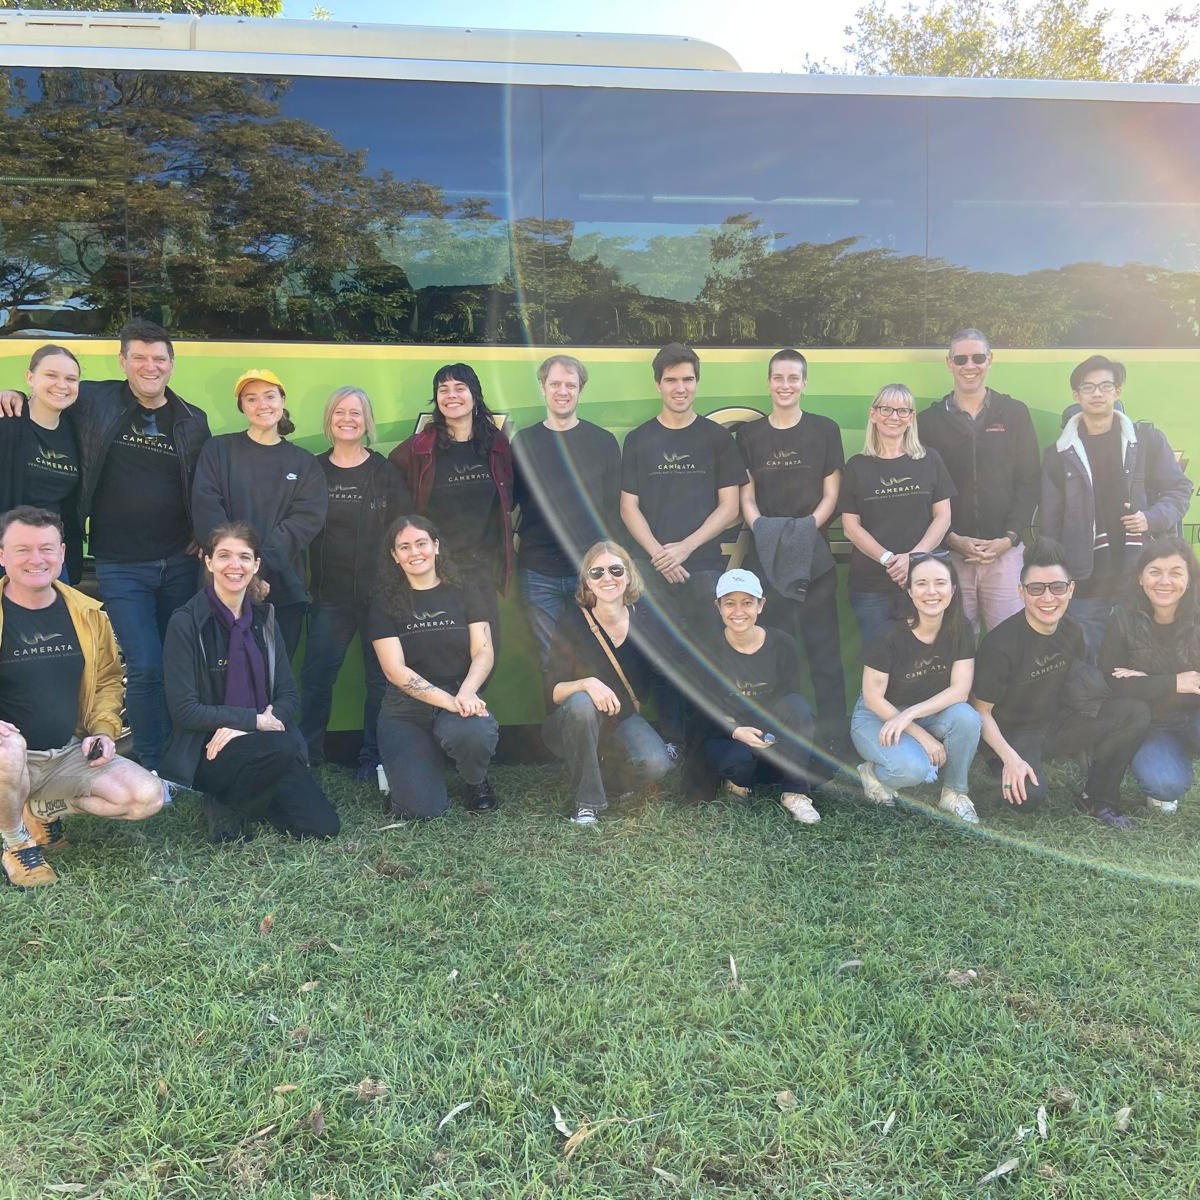 🚌 We’re off on our regional tour! In the next two weeks, we’ll be travelling to the communities of #Mundubbera, #Monto, #Bundaberg, #Biloela and #Theodore, performing concerts, visiting kindys, aged-care and schools. We can’t wait to meet all you all! Stay tuned.